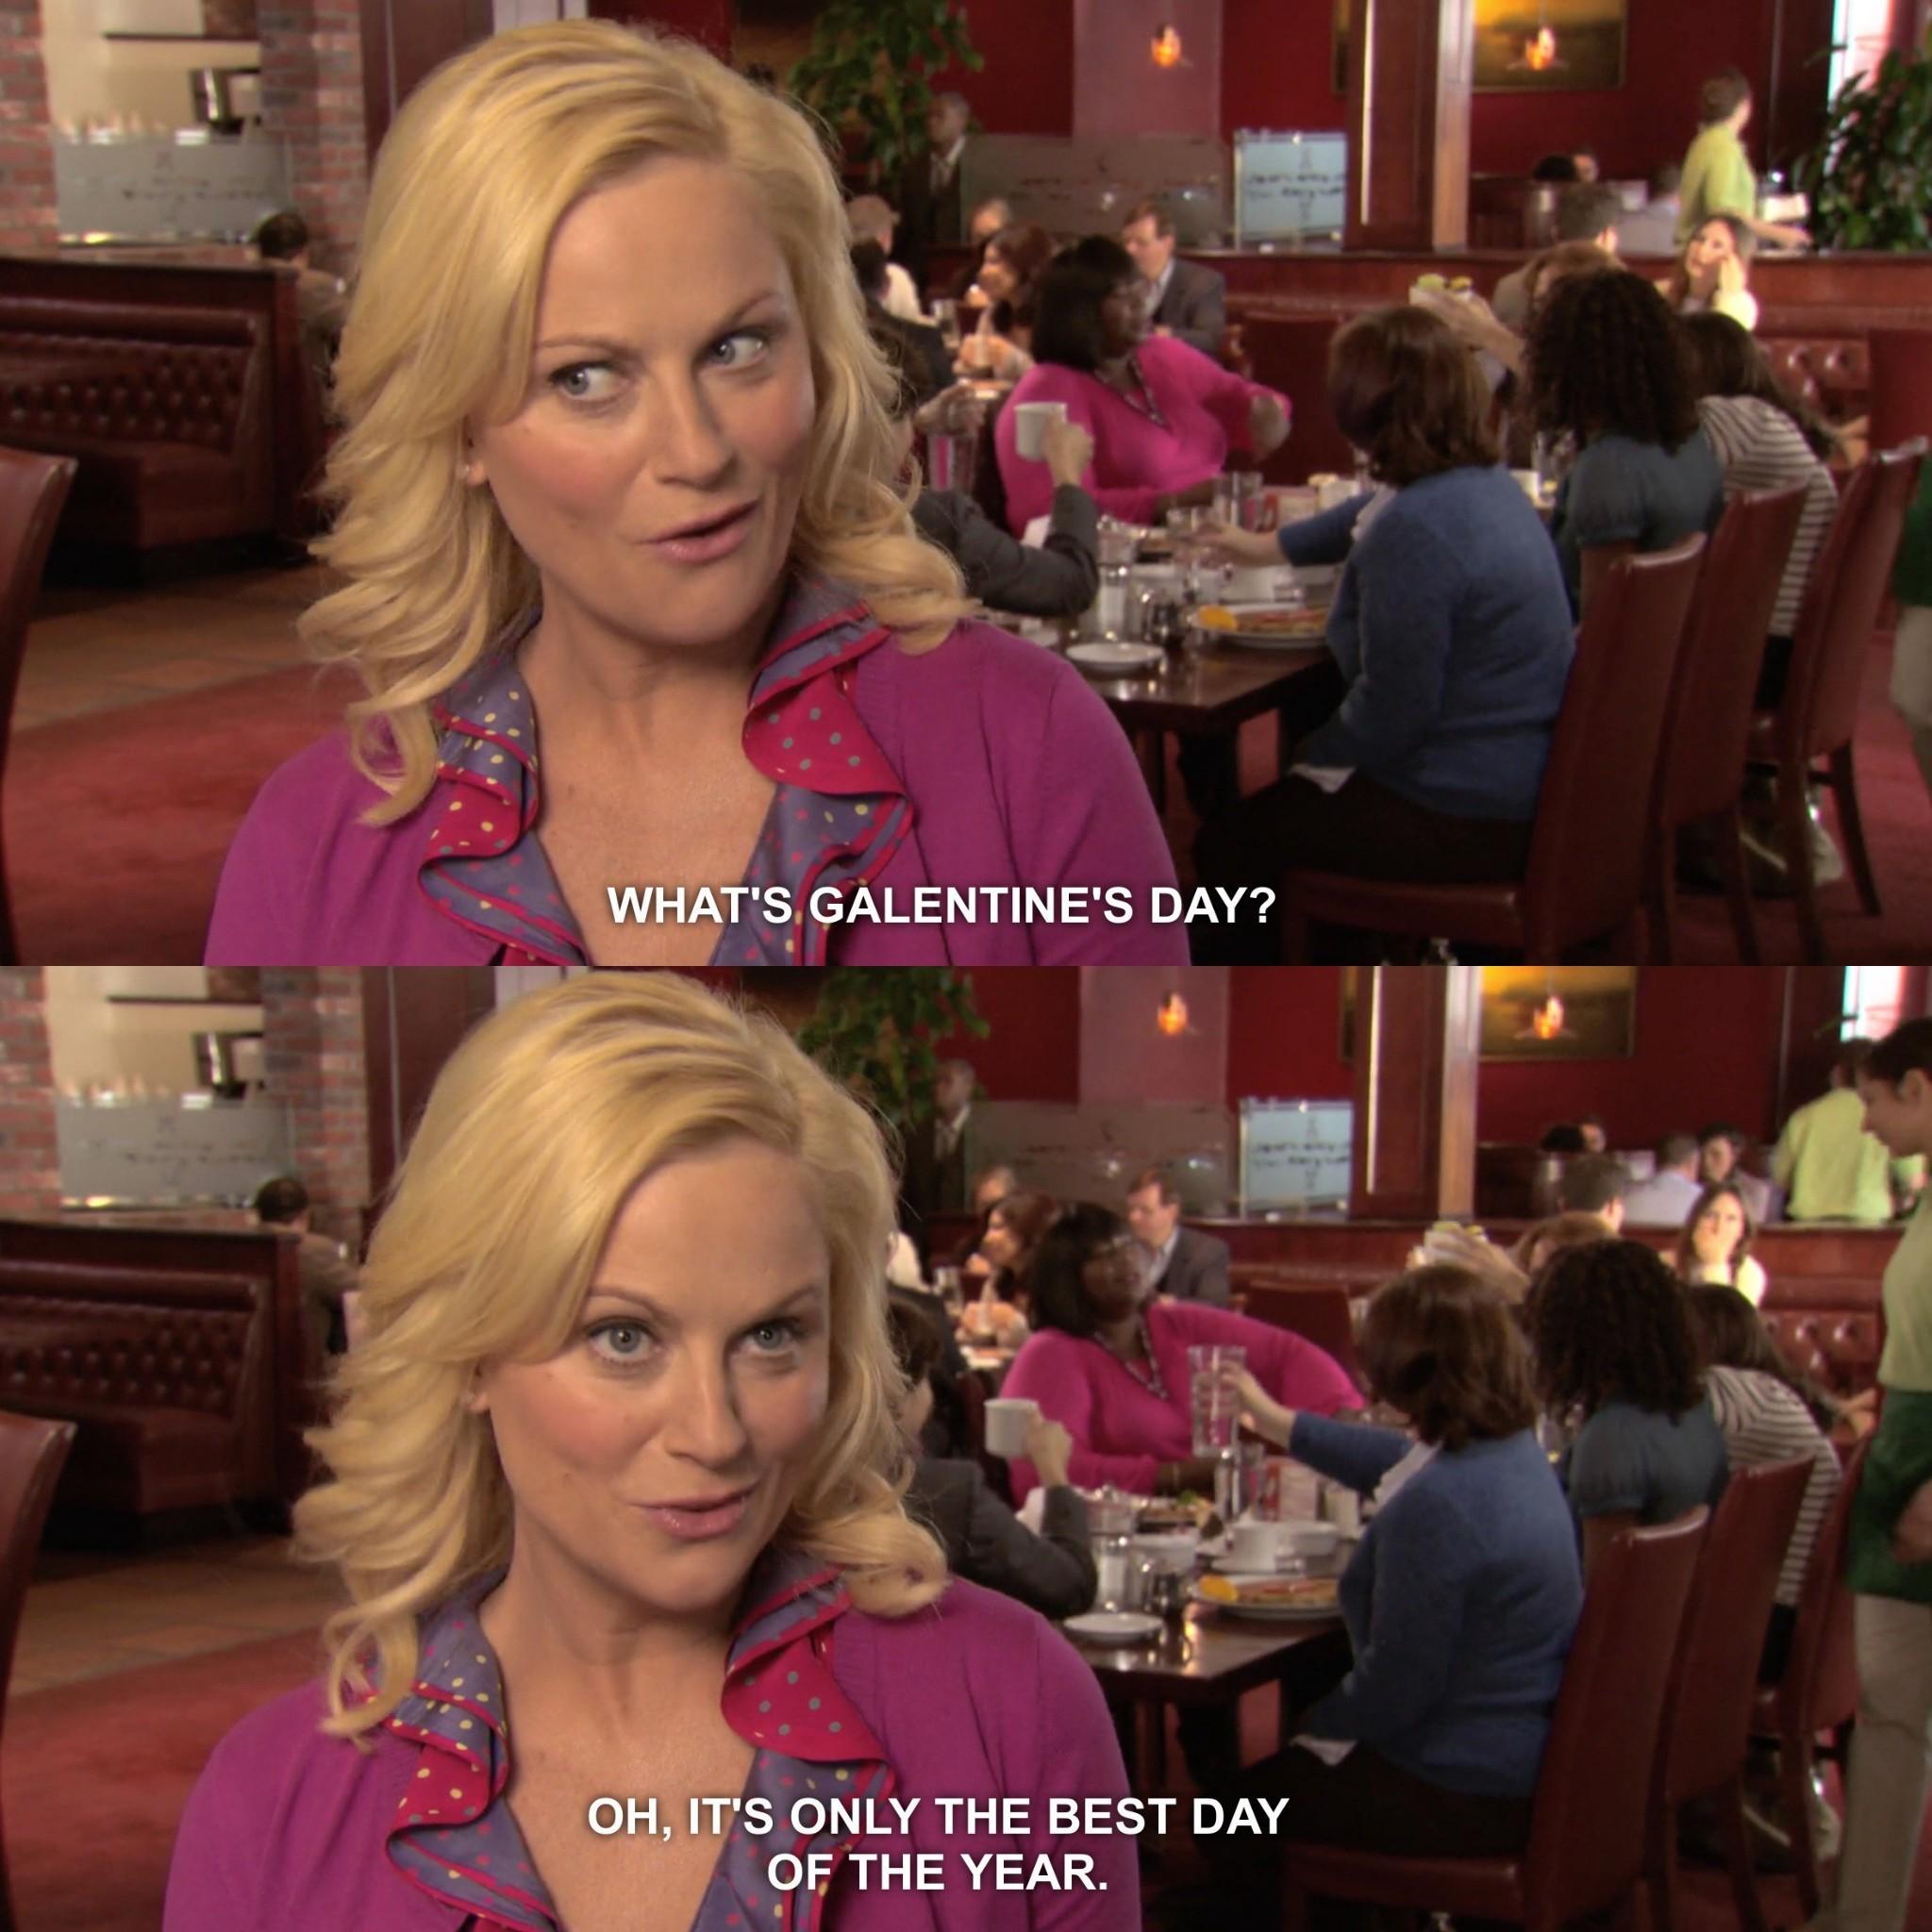 A screengrab from NBC's show Parks and Recreation. Leslie Knope saying, "What's Galentines' Day? Oh, it's only the best day of the year."